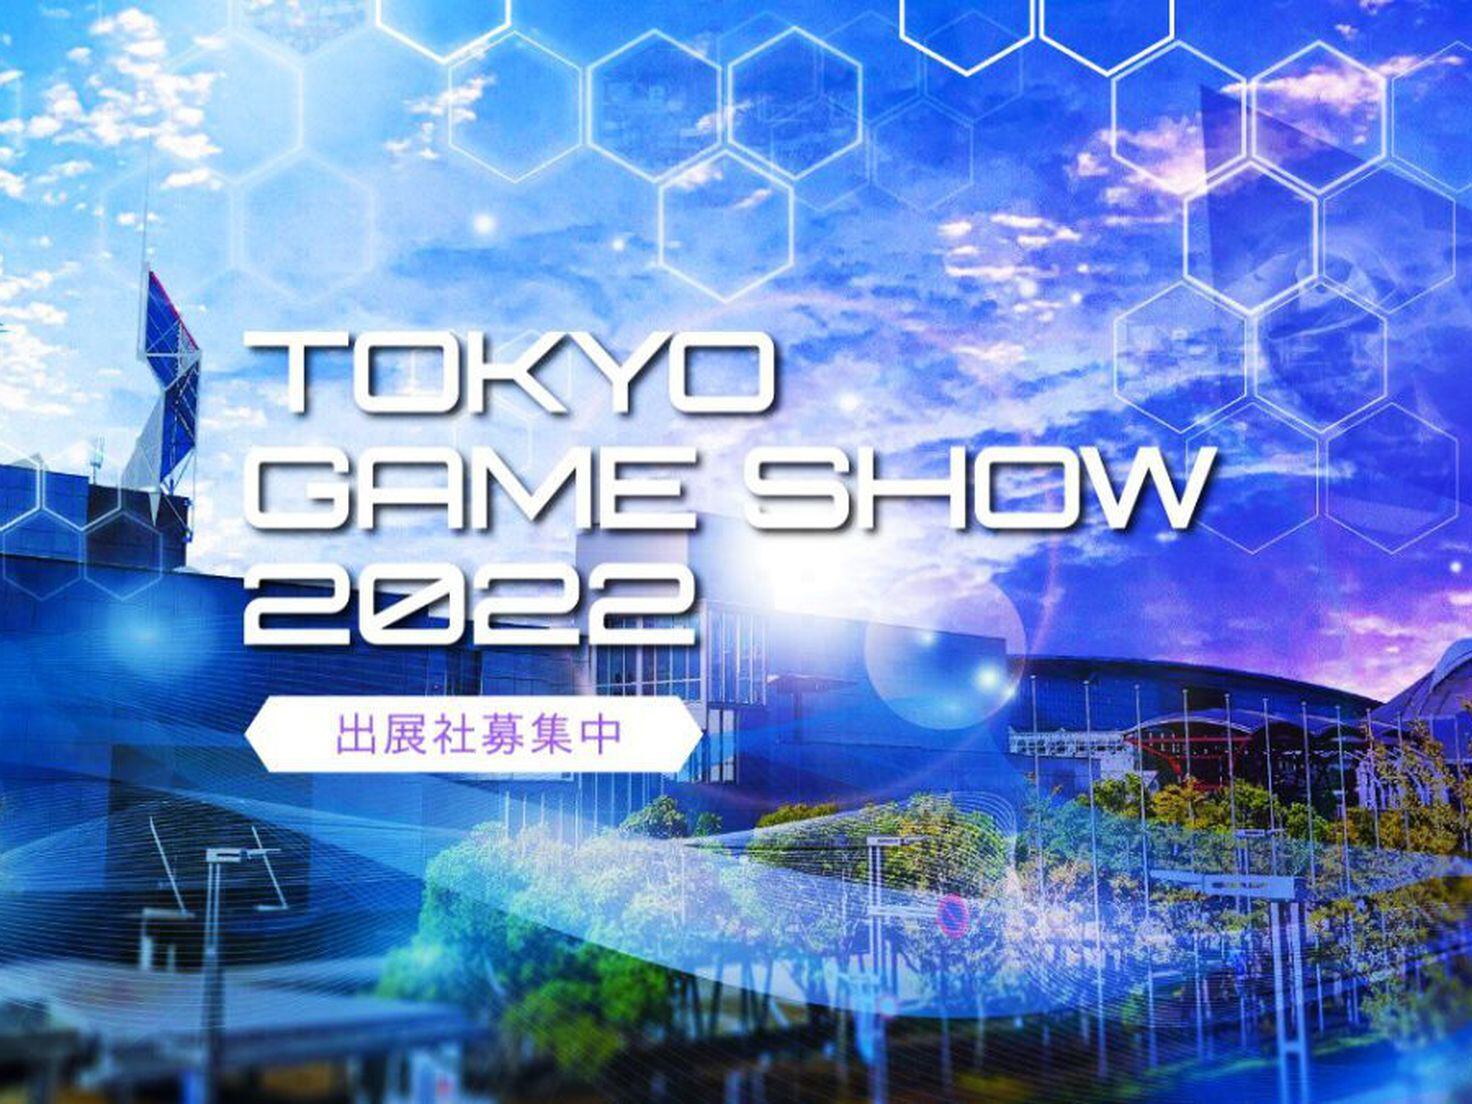 Xbox Digital Broadcast at Tokyo Game Show 2023: Every Announcement